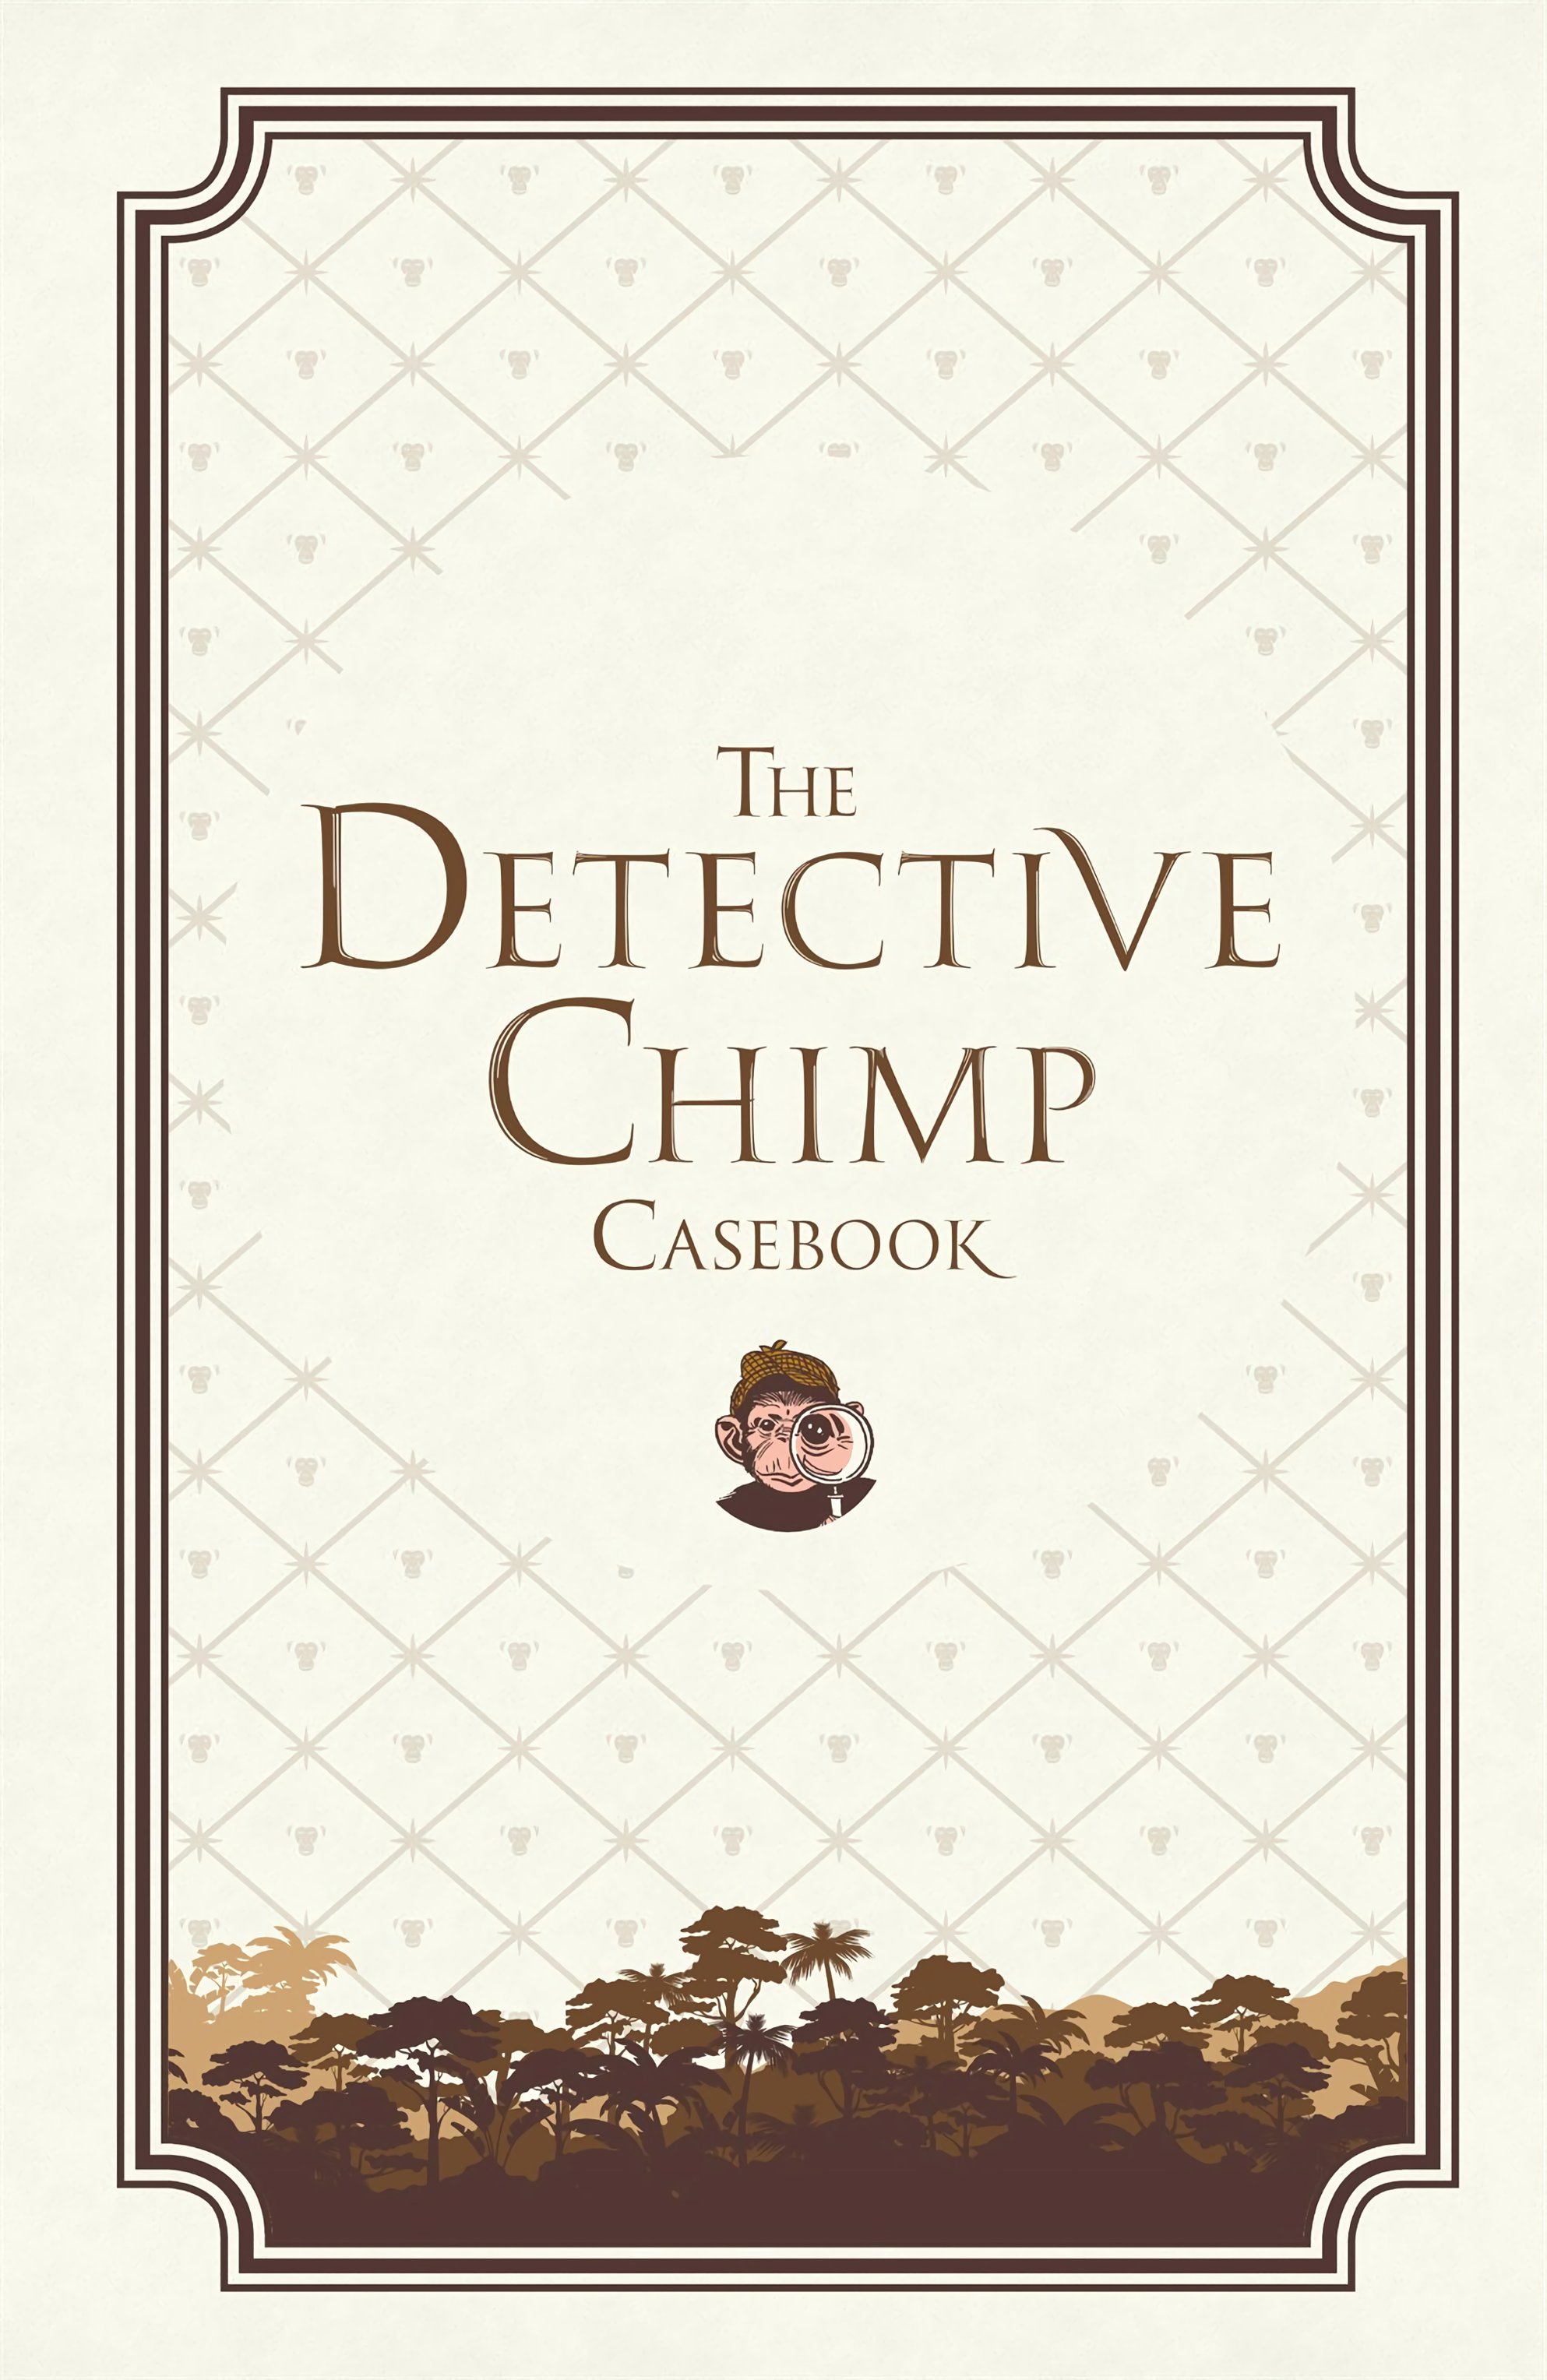 Read online The Detective Chimp Casebook comic -  Issue # TPB (Part 1) - 2